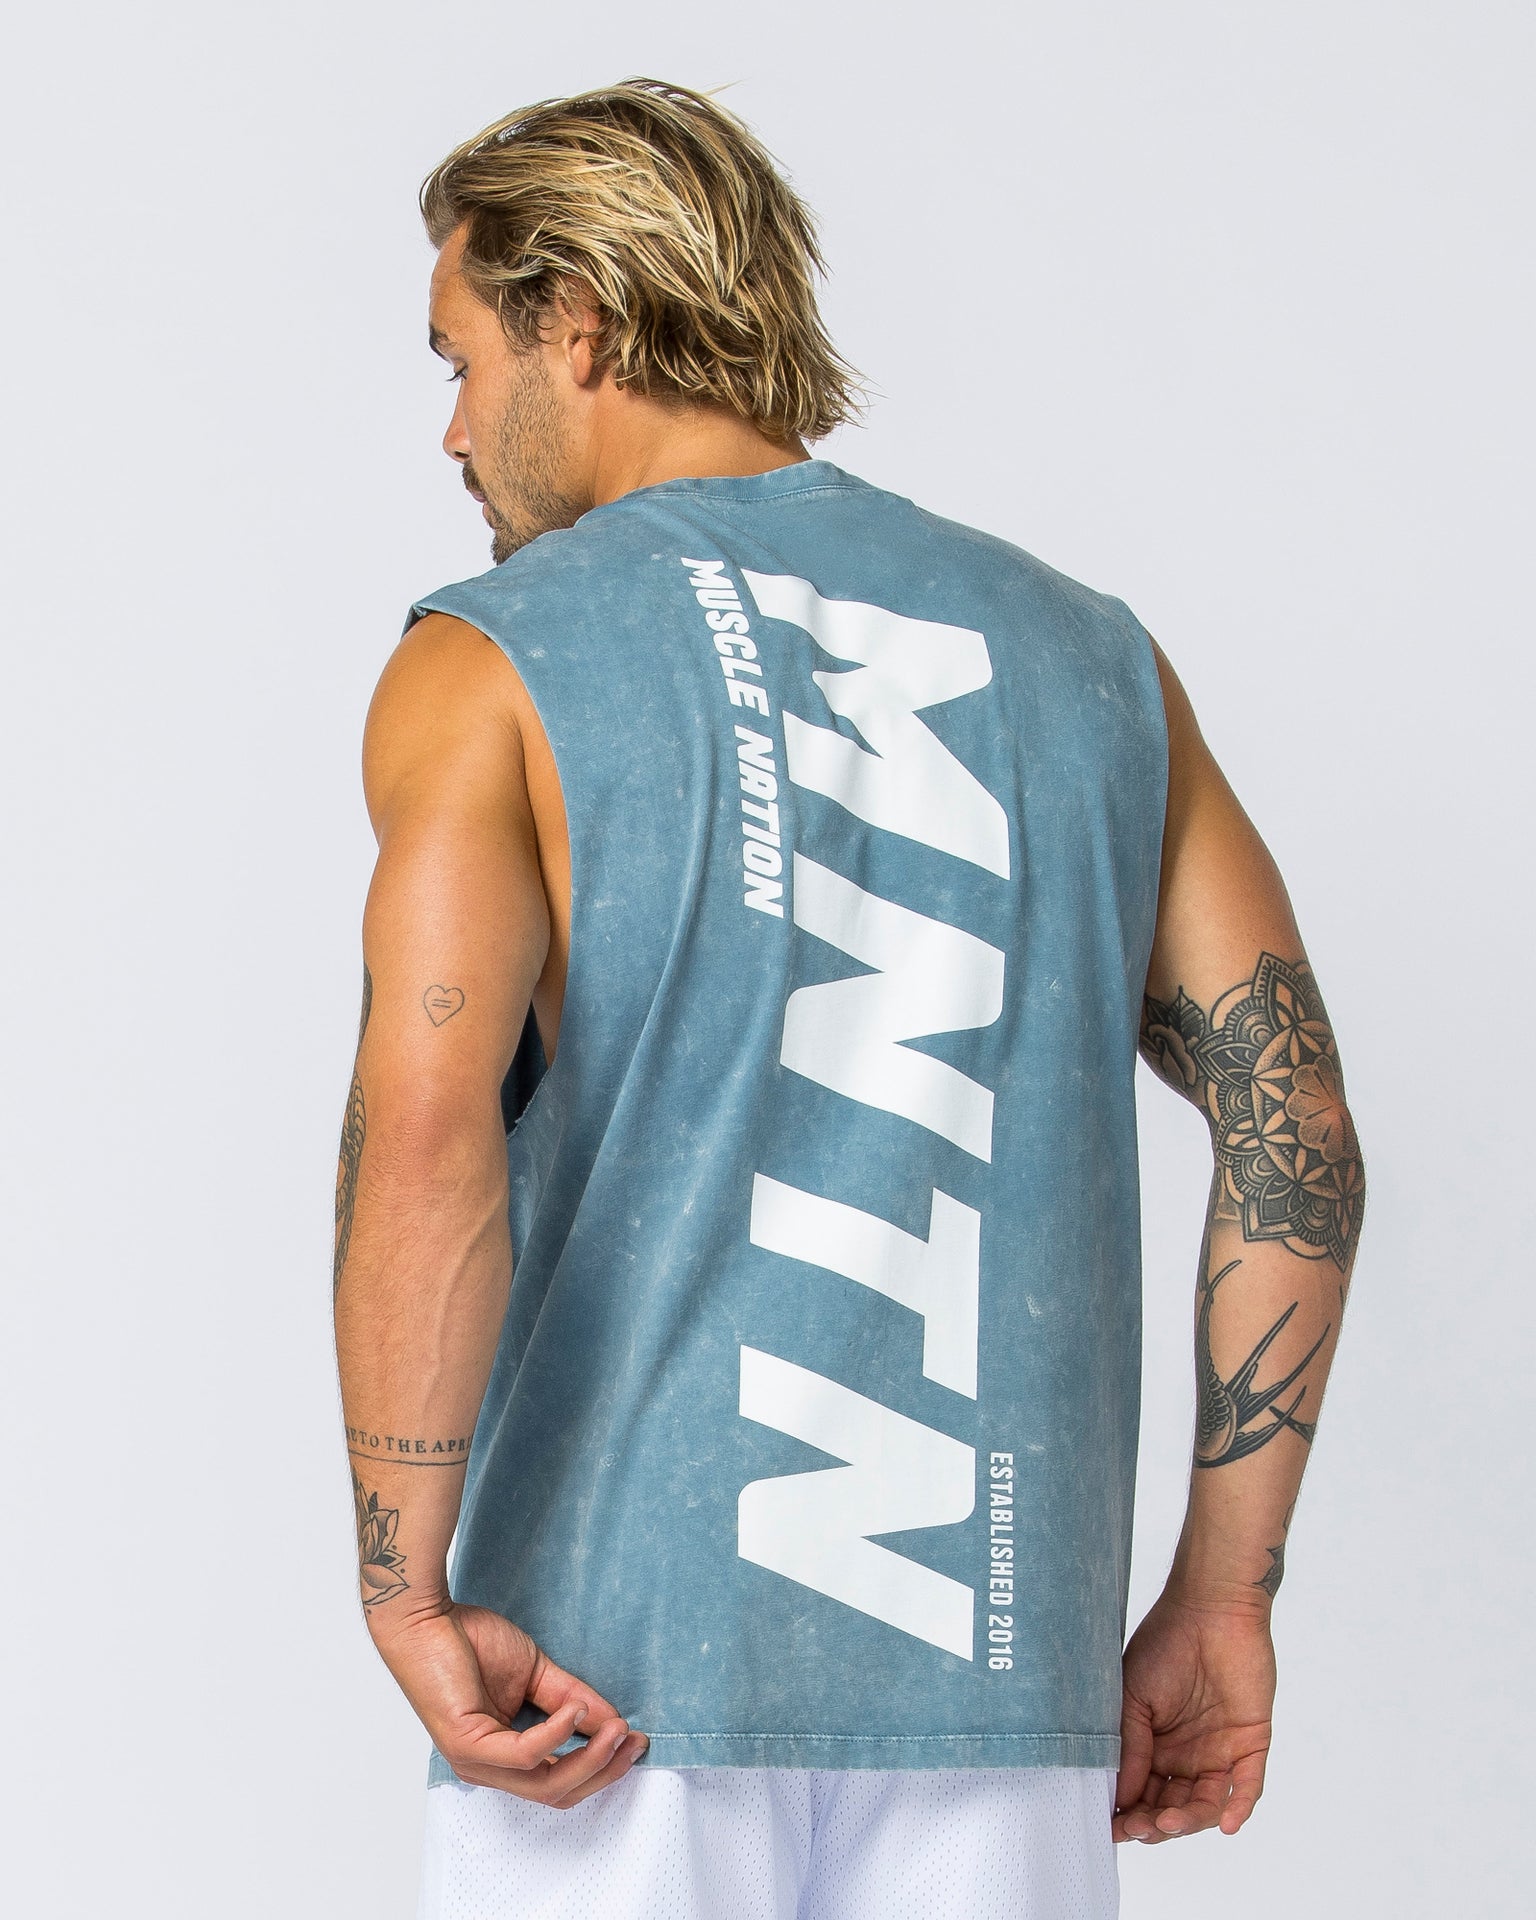 Muscle Nation Tank Tops Boxy Vintage Tank - Washed Elemental Blue